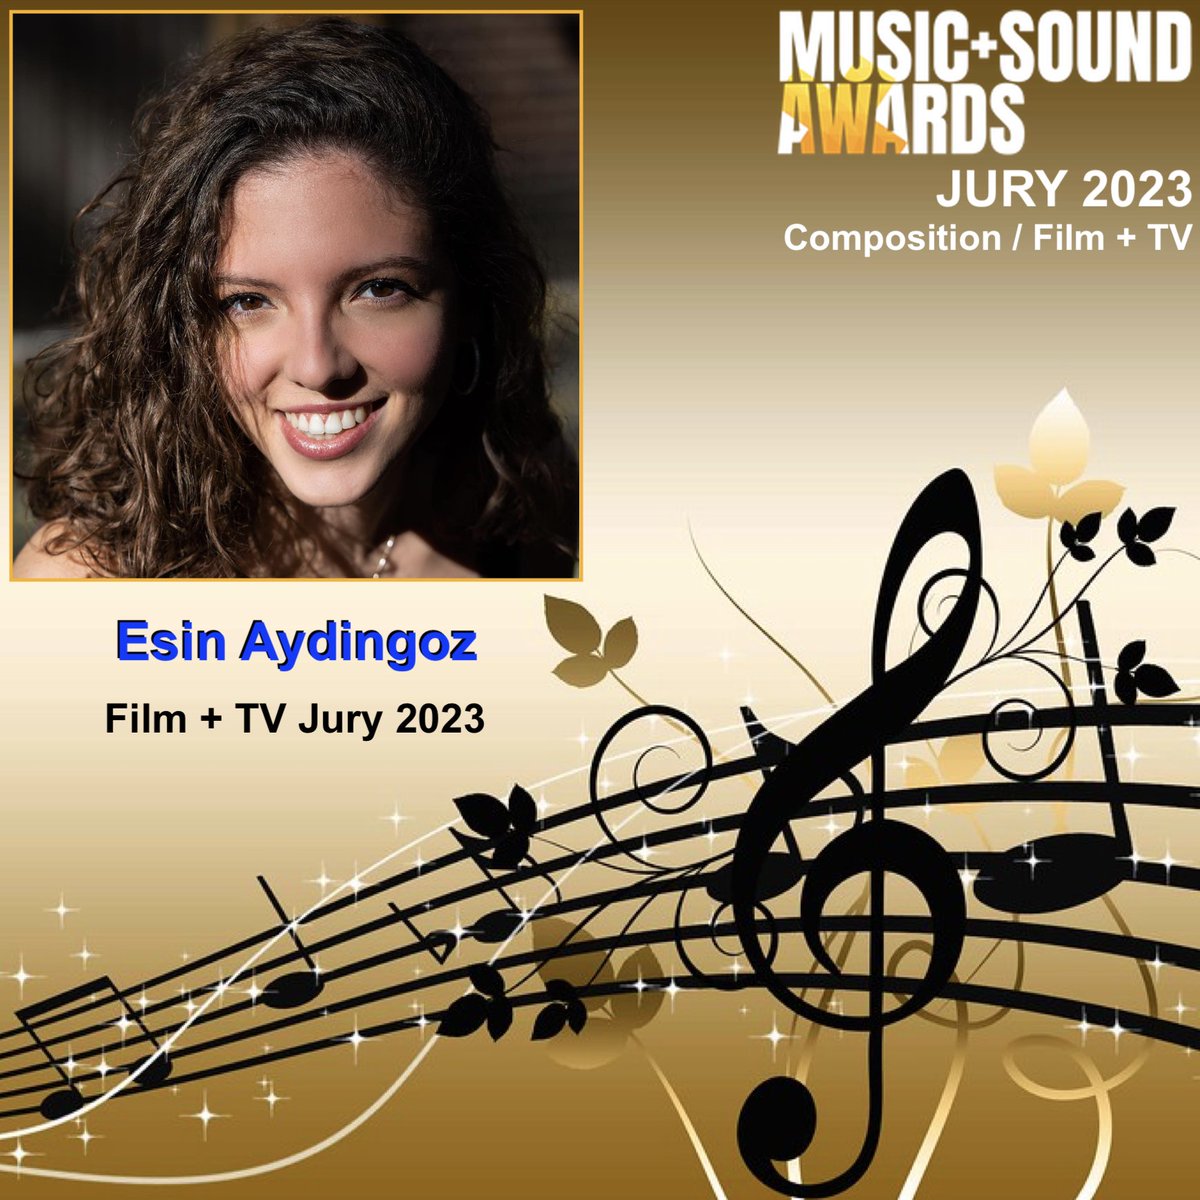 We're happy to report that our talented client, composer / conductor / arranger / songwriter @esinaydingoz will be a juror for the Music + Sound Awards! Way to go Esin! #esinaydingoz #masawards #awards #juror #womencomposer #femalecomposer #composer

More masawards.com